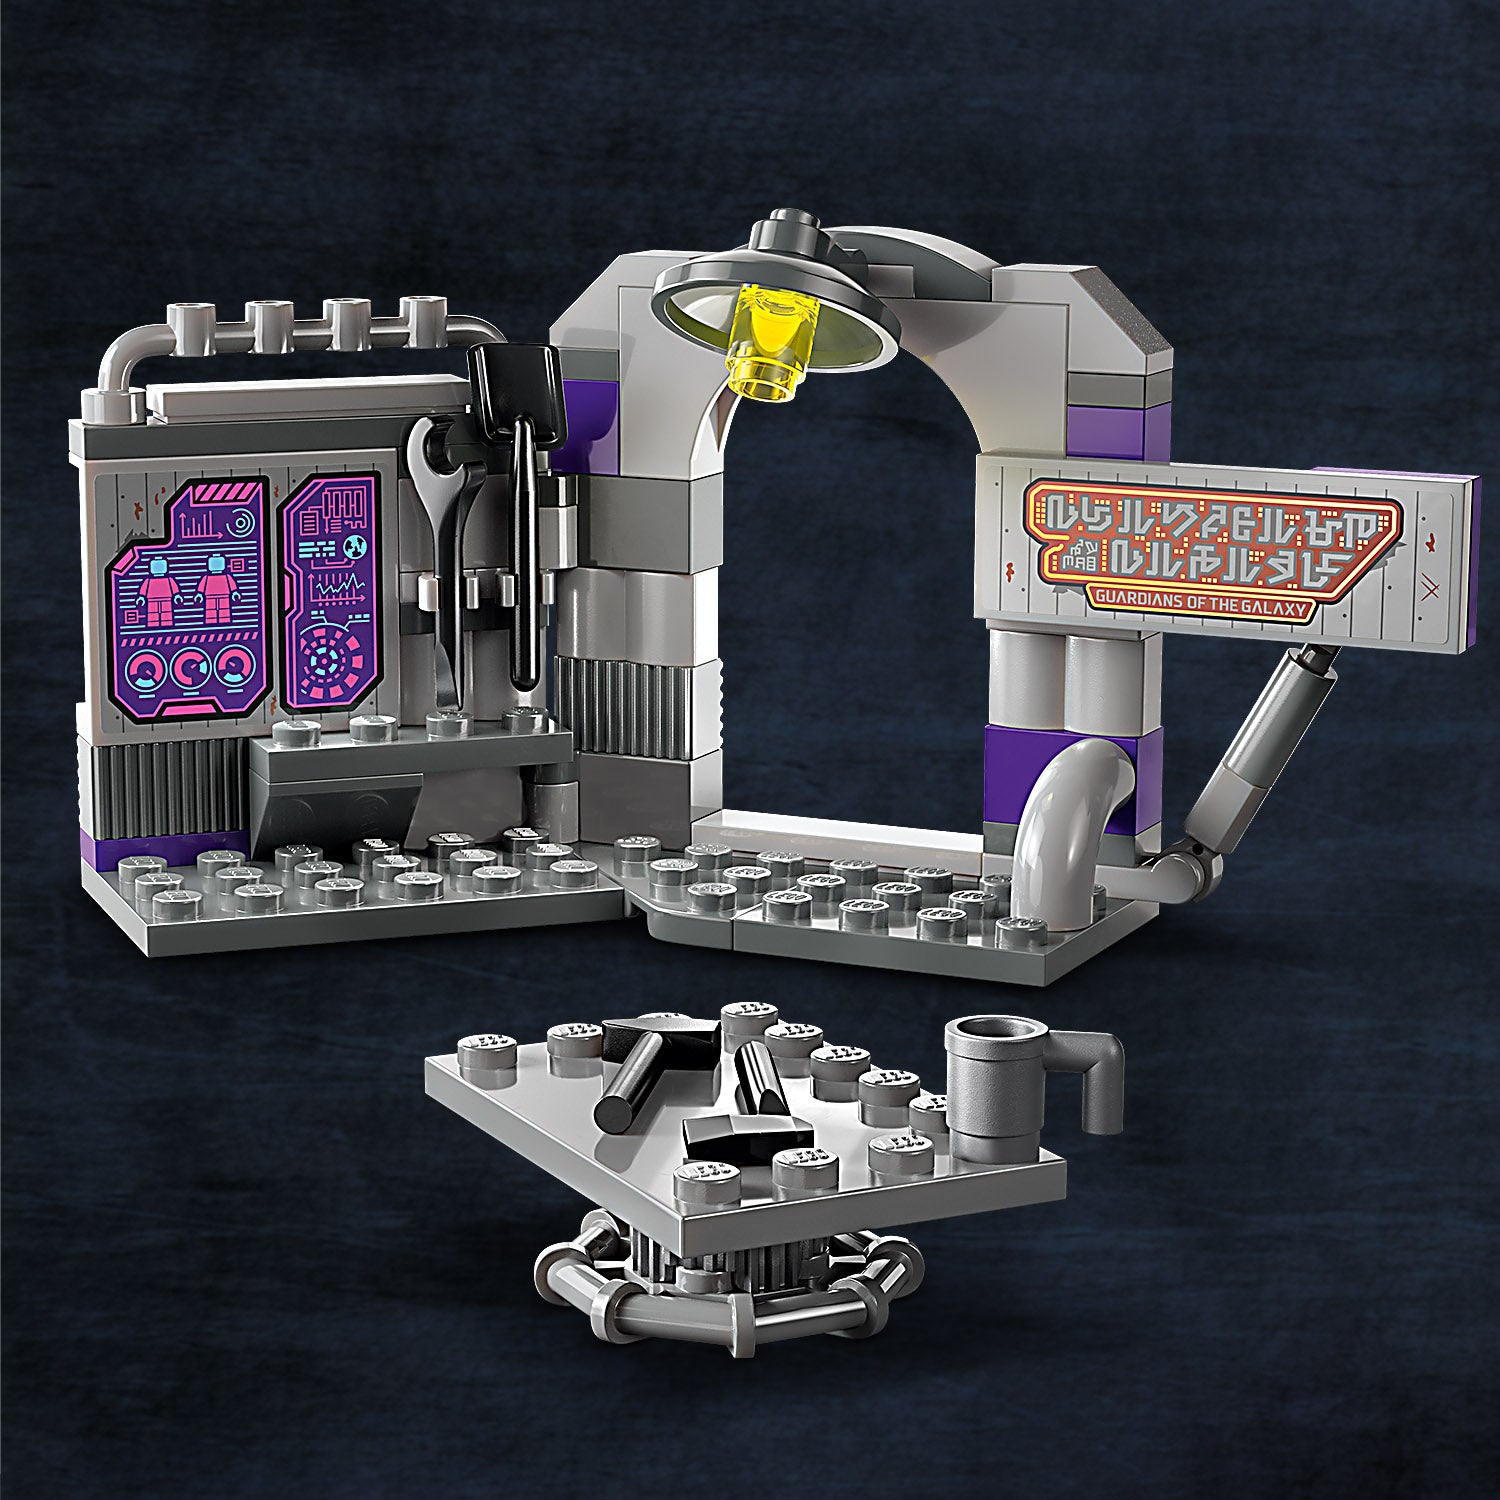 Lego 76253 Guardians of the Galaxy HeadQuarters